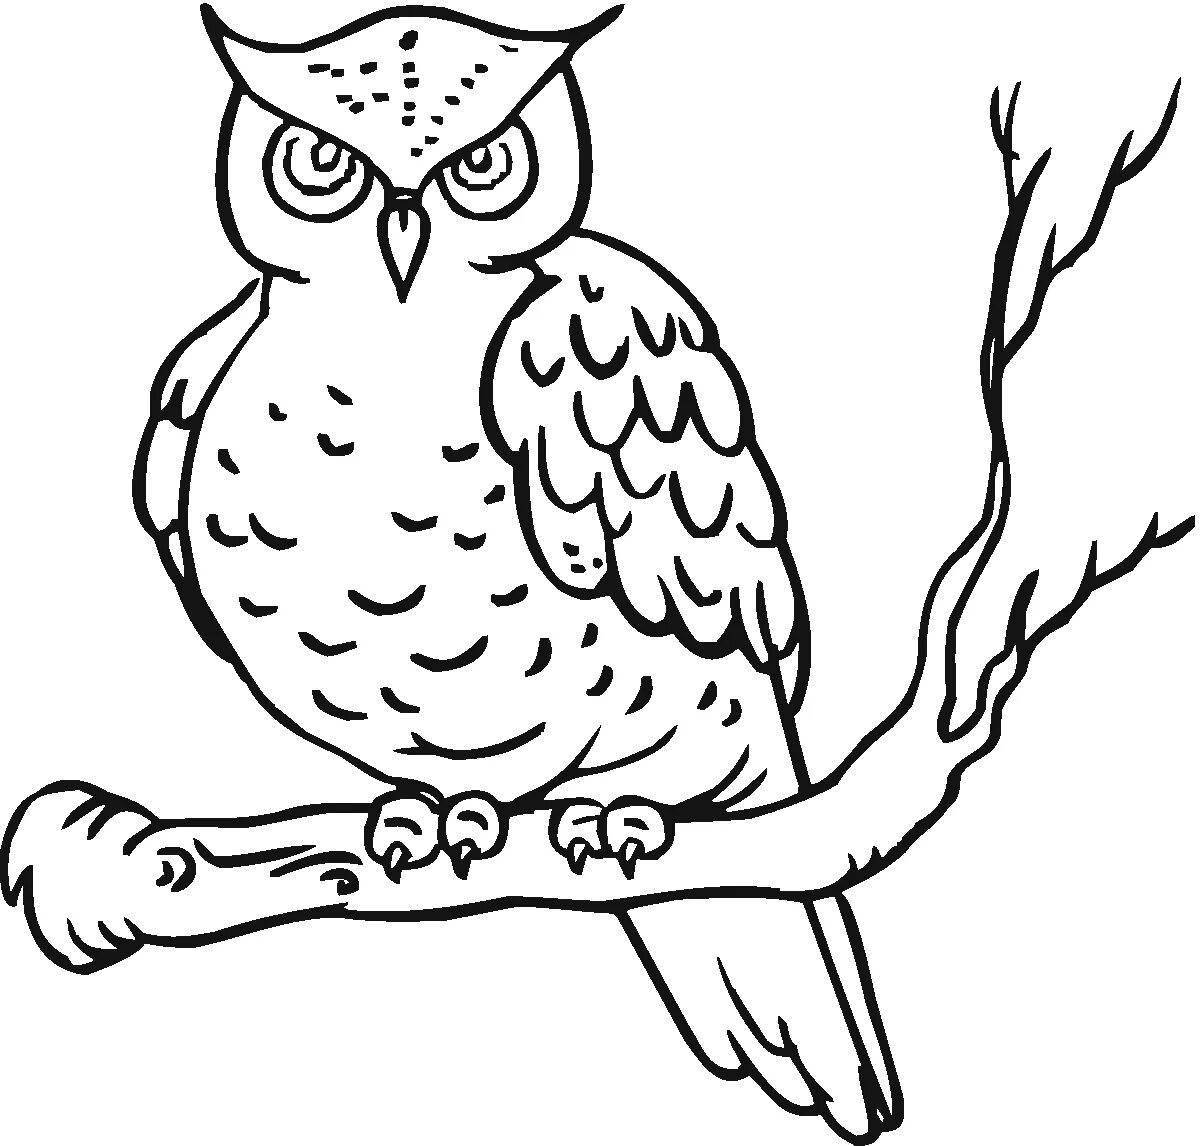 Adorable owl coloring book for kids